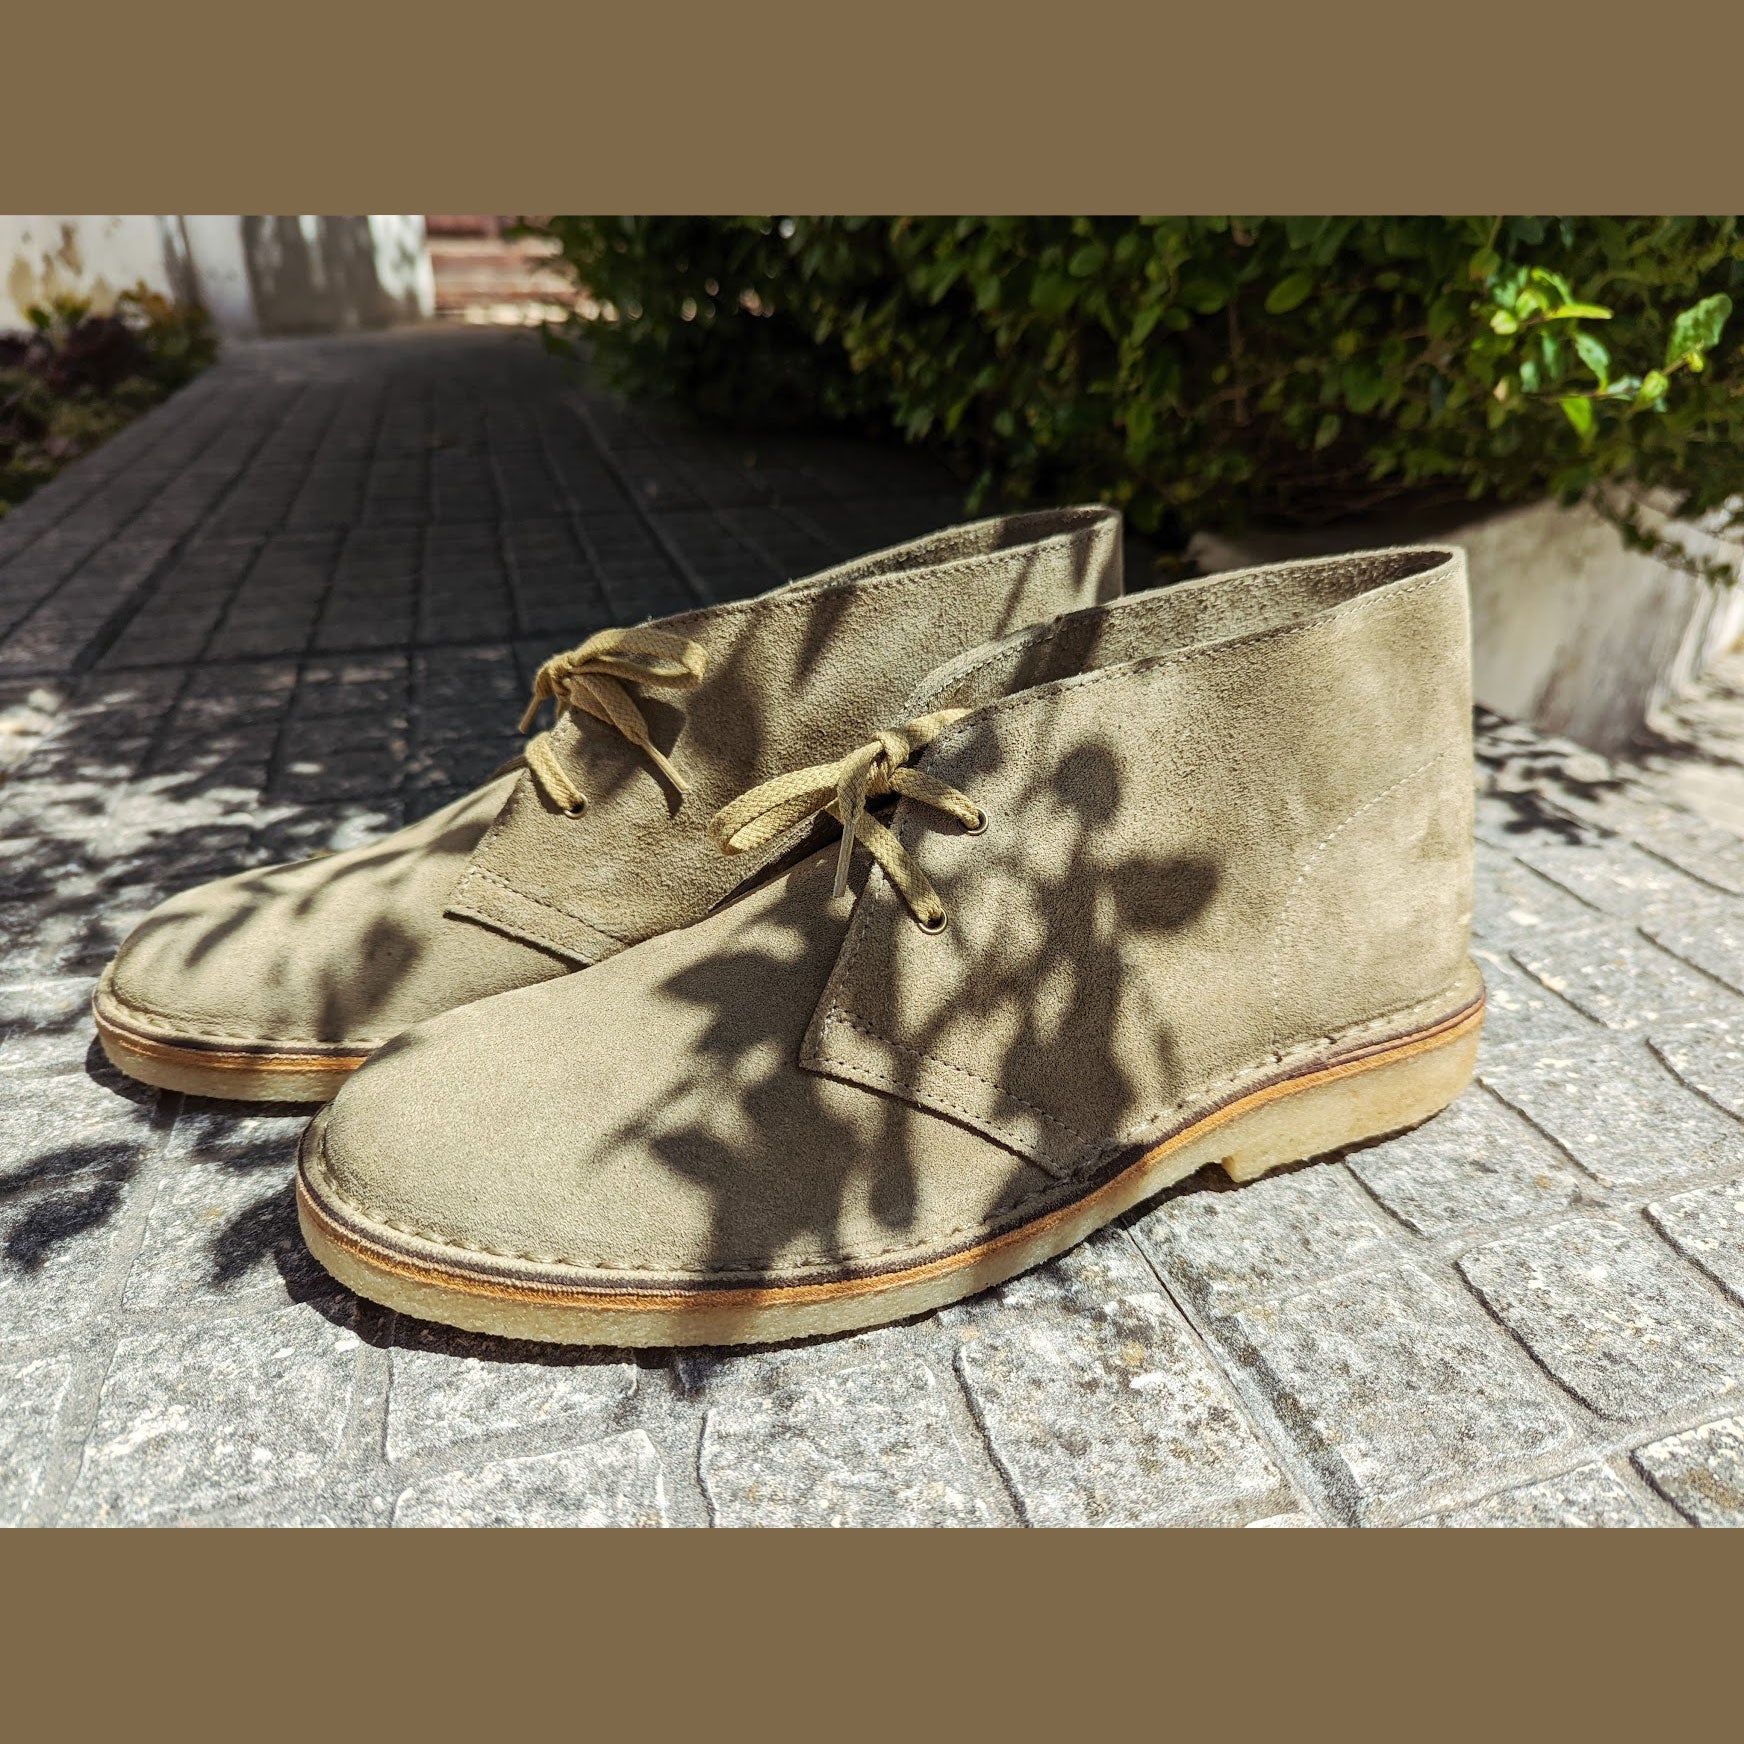 Our Suede Collection: "Sand"